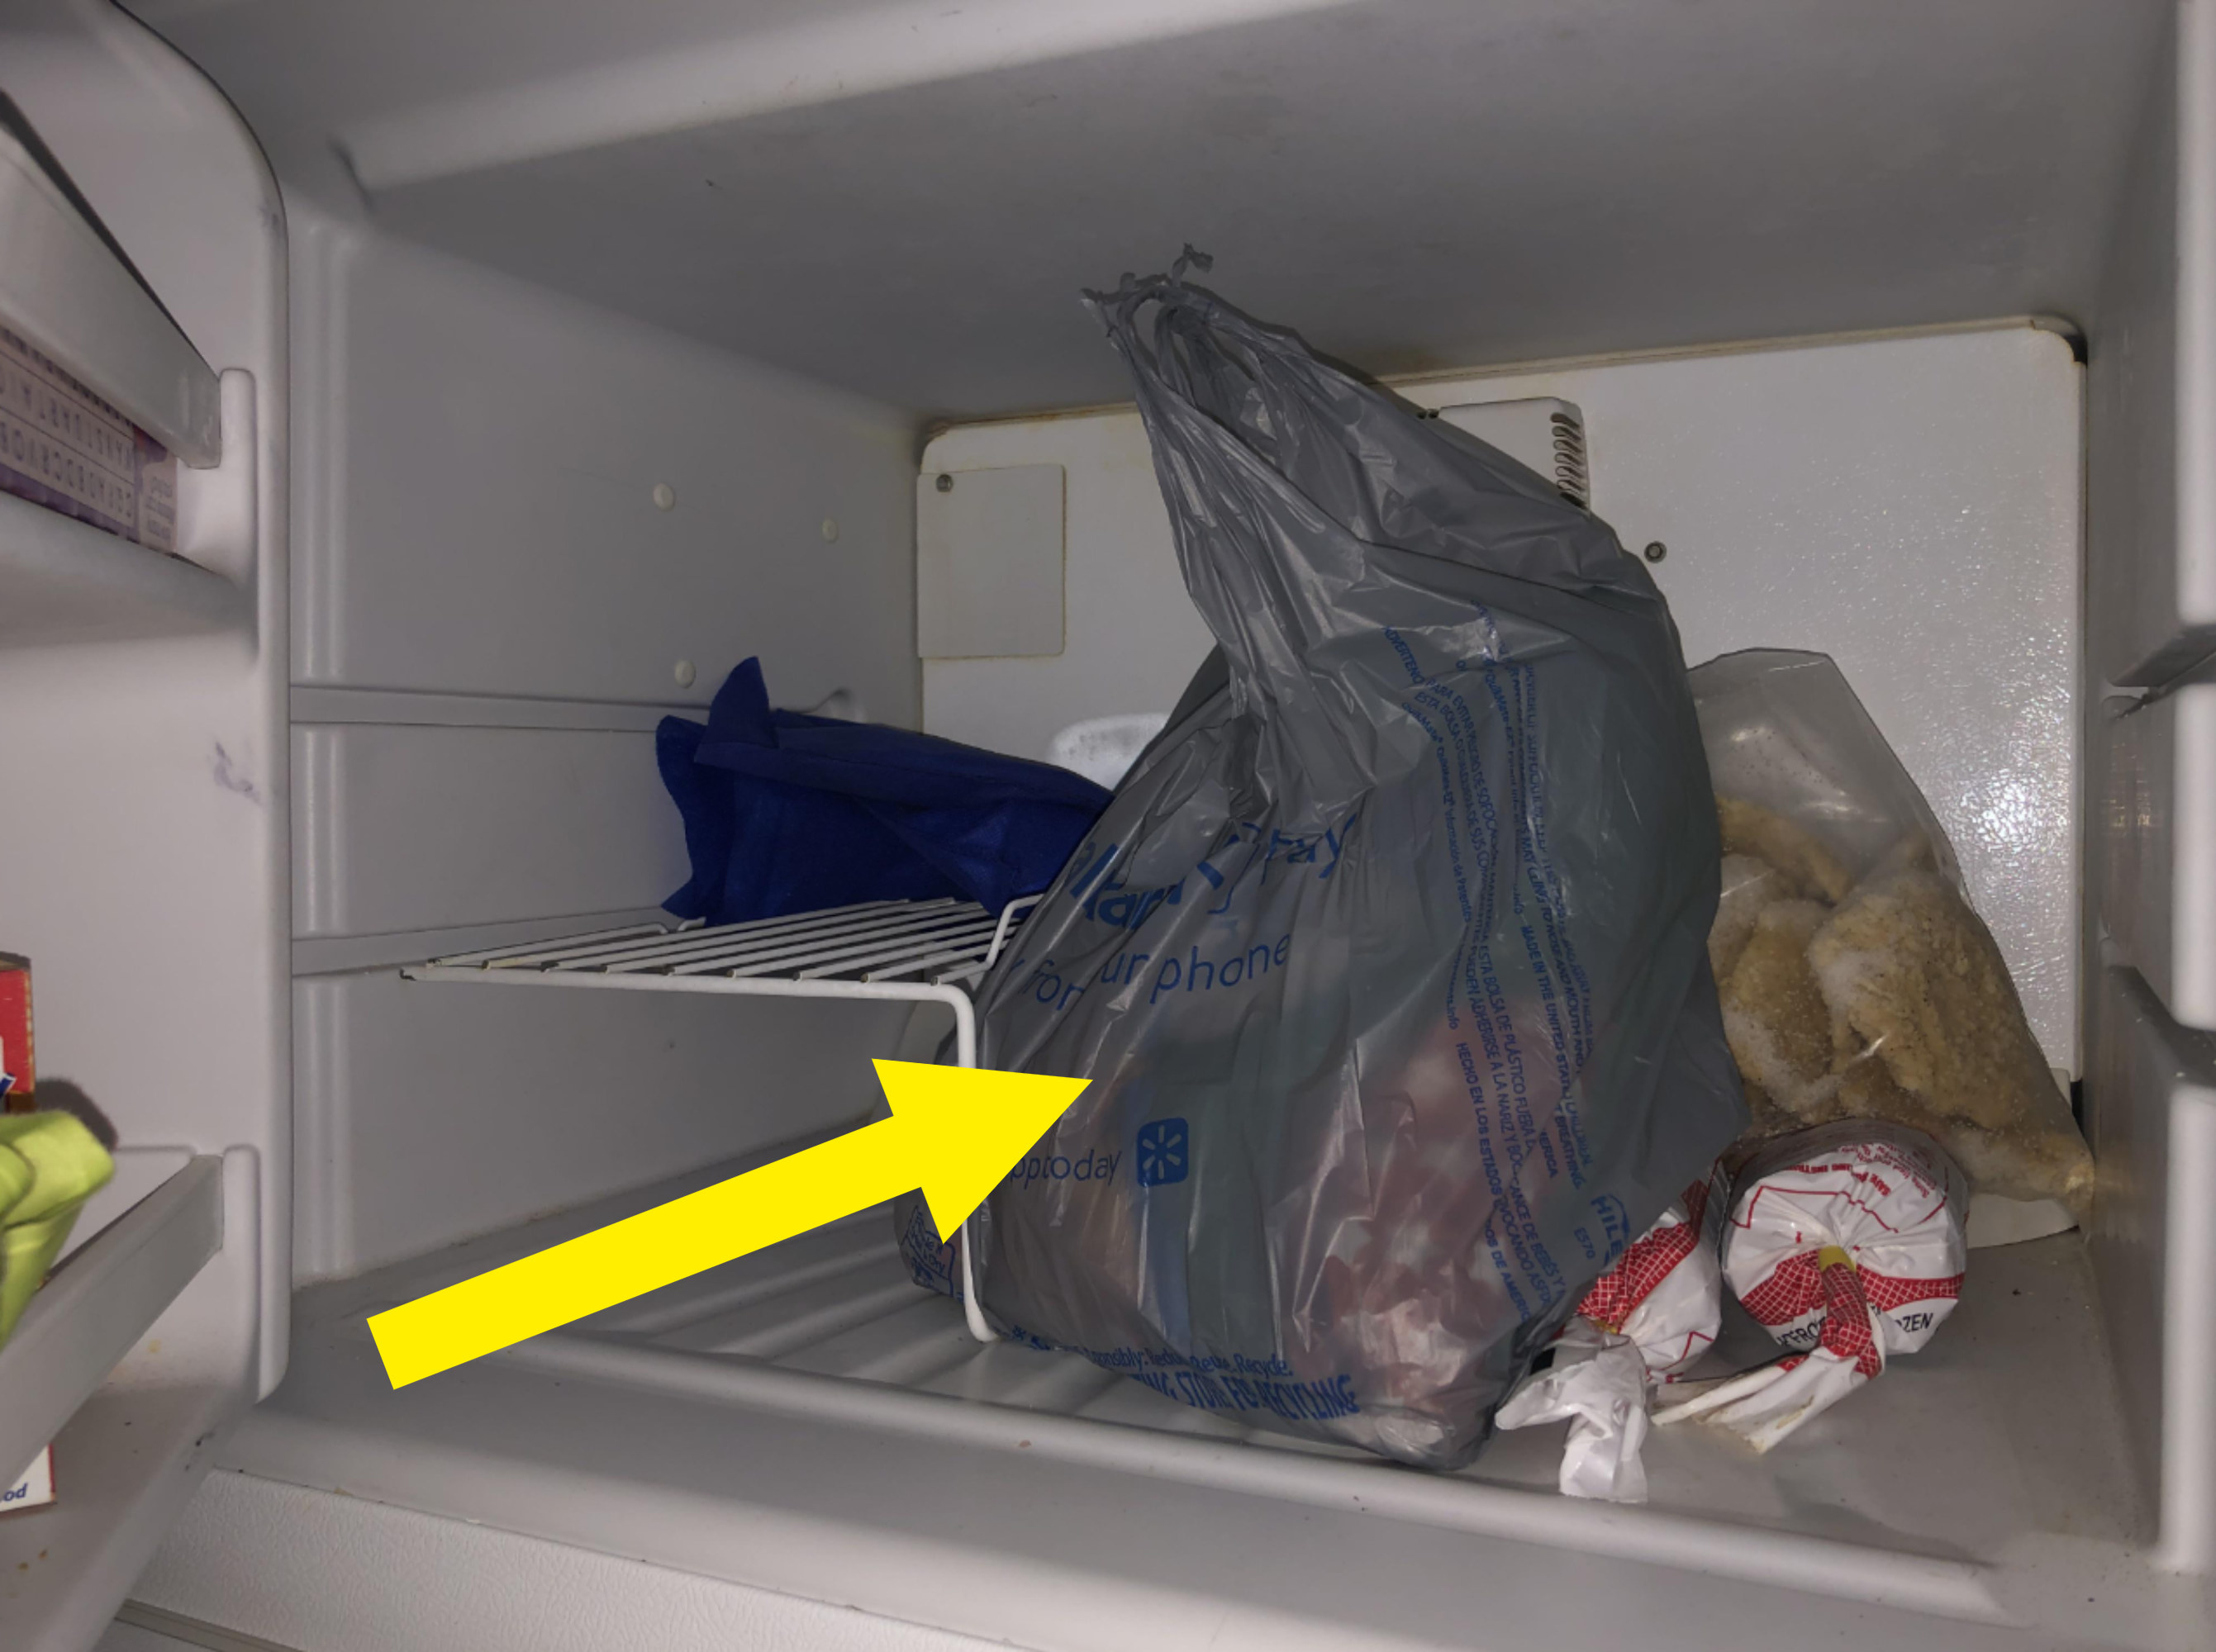 A grocery bag in the freezer